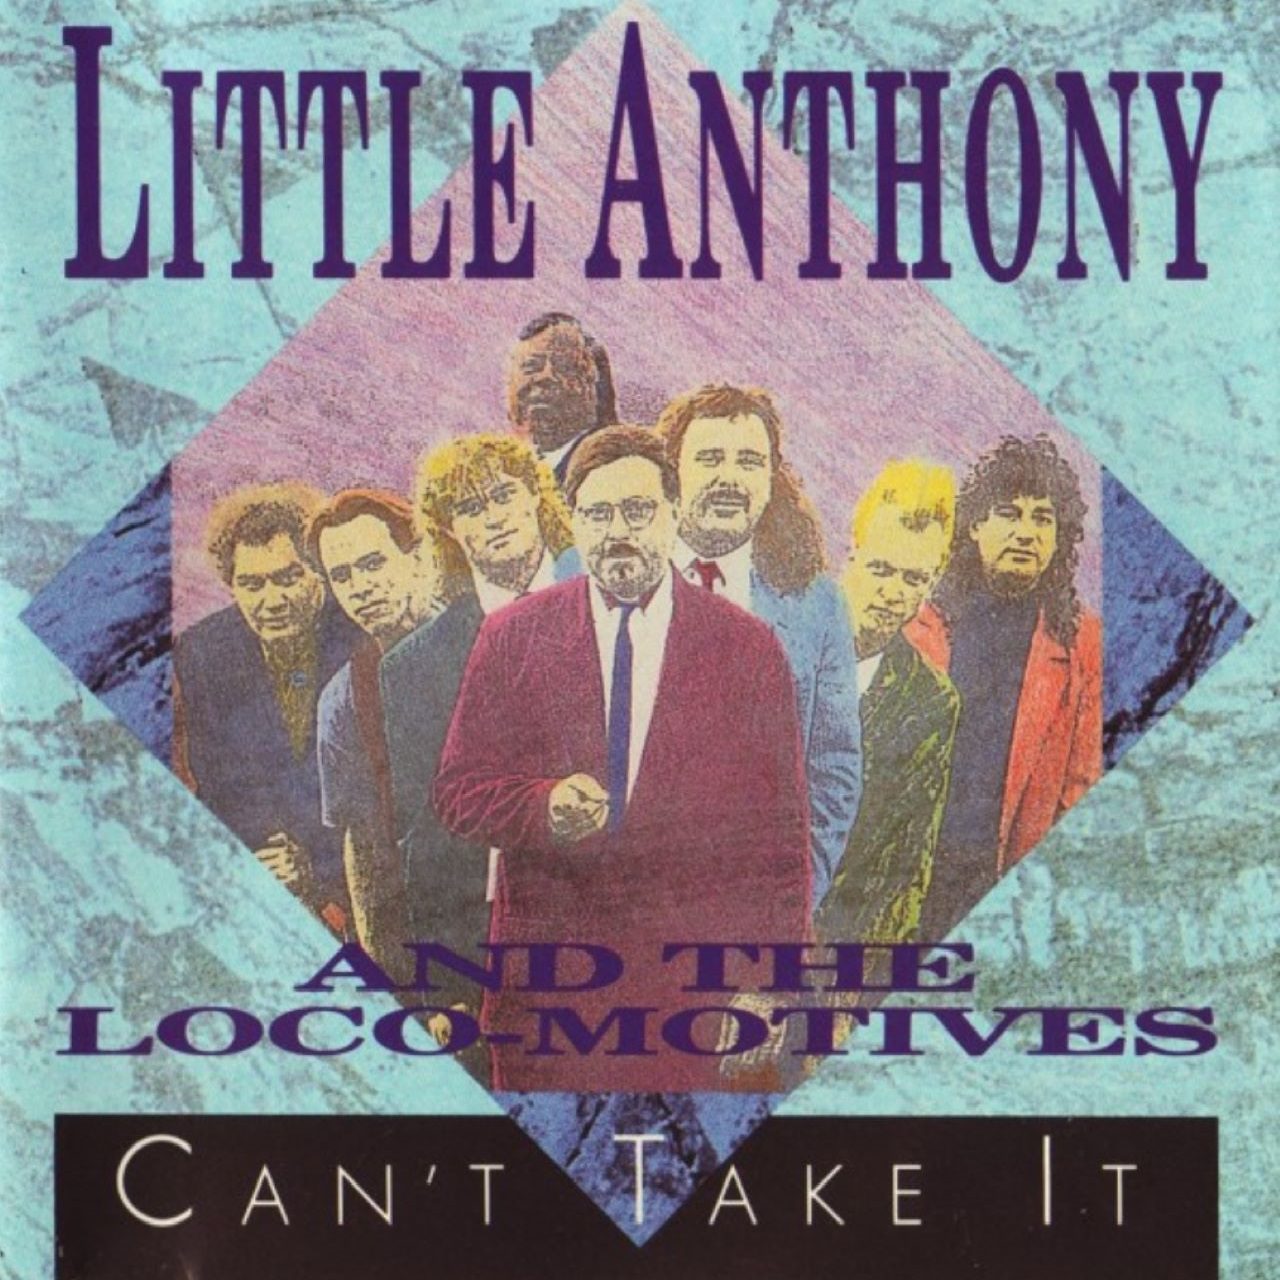 Little Anthony And The Loco-Motives – Can’t Take It cover album